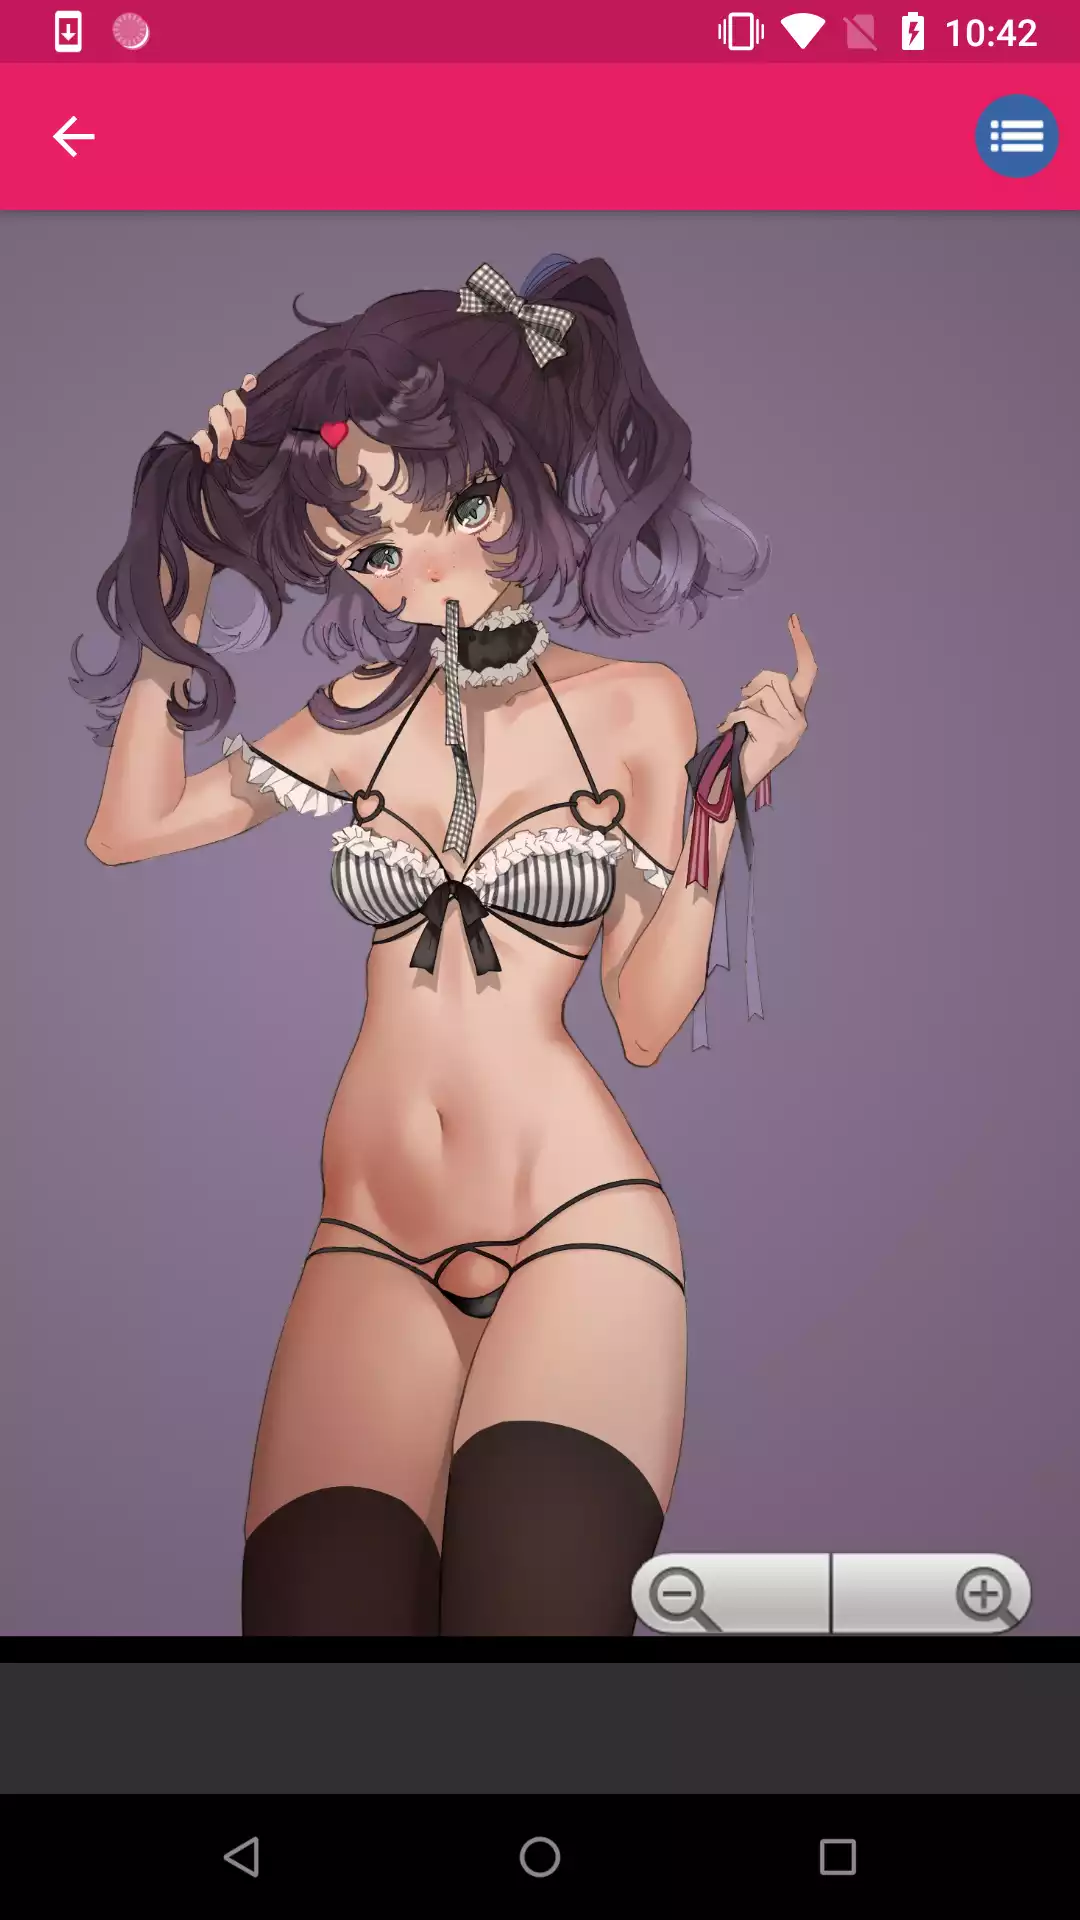 Sexy Anime Girls Wallpapers backgrounds,pic,henti,android,apps,porn,pics,henta,photo,image,download,app,girls,wallpapers,pornstar,hot,gallary,sexy,pictures,apk,sissy,xxx,anime,adult,hentai